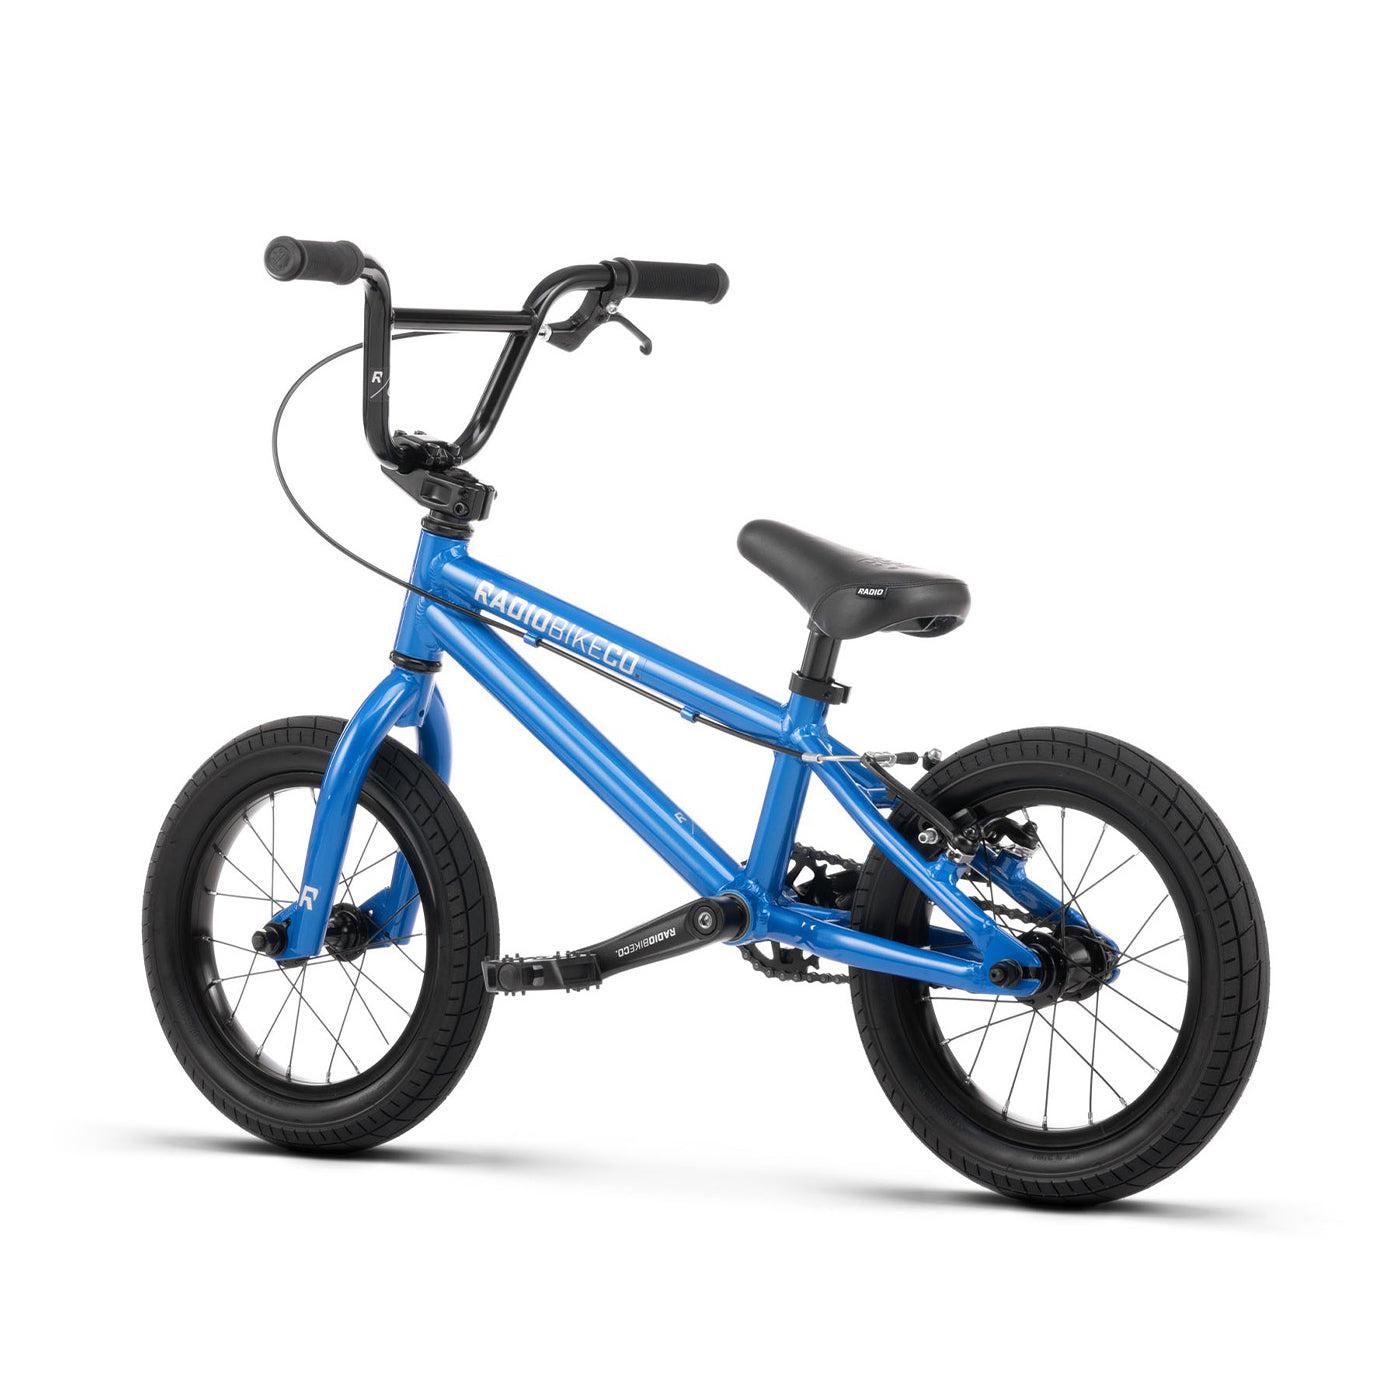 A lightweight kids bike, the Radio Dice 14 Inch Bike features training wheels, black handlebars, and black tires. Its durable 6061-T6 alloy frame proudly displays "RADIO BIKES" in white lettering.